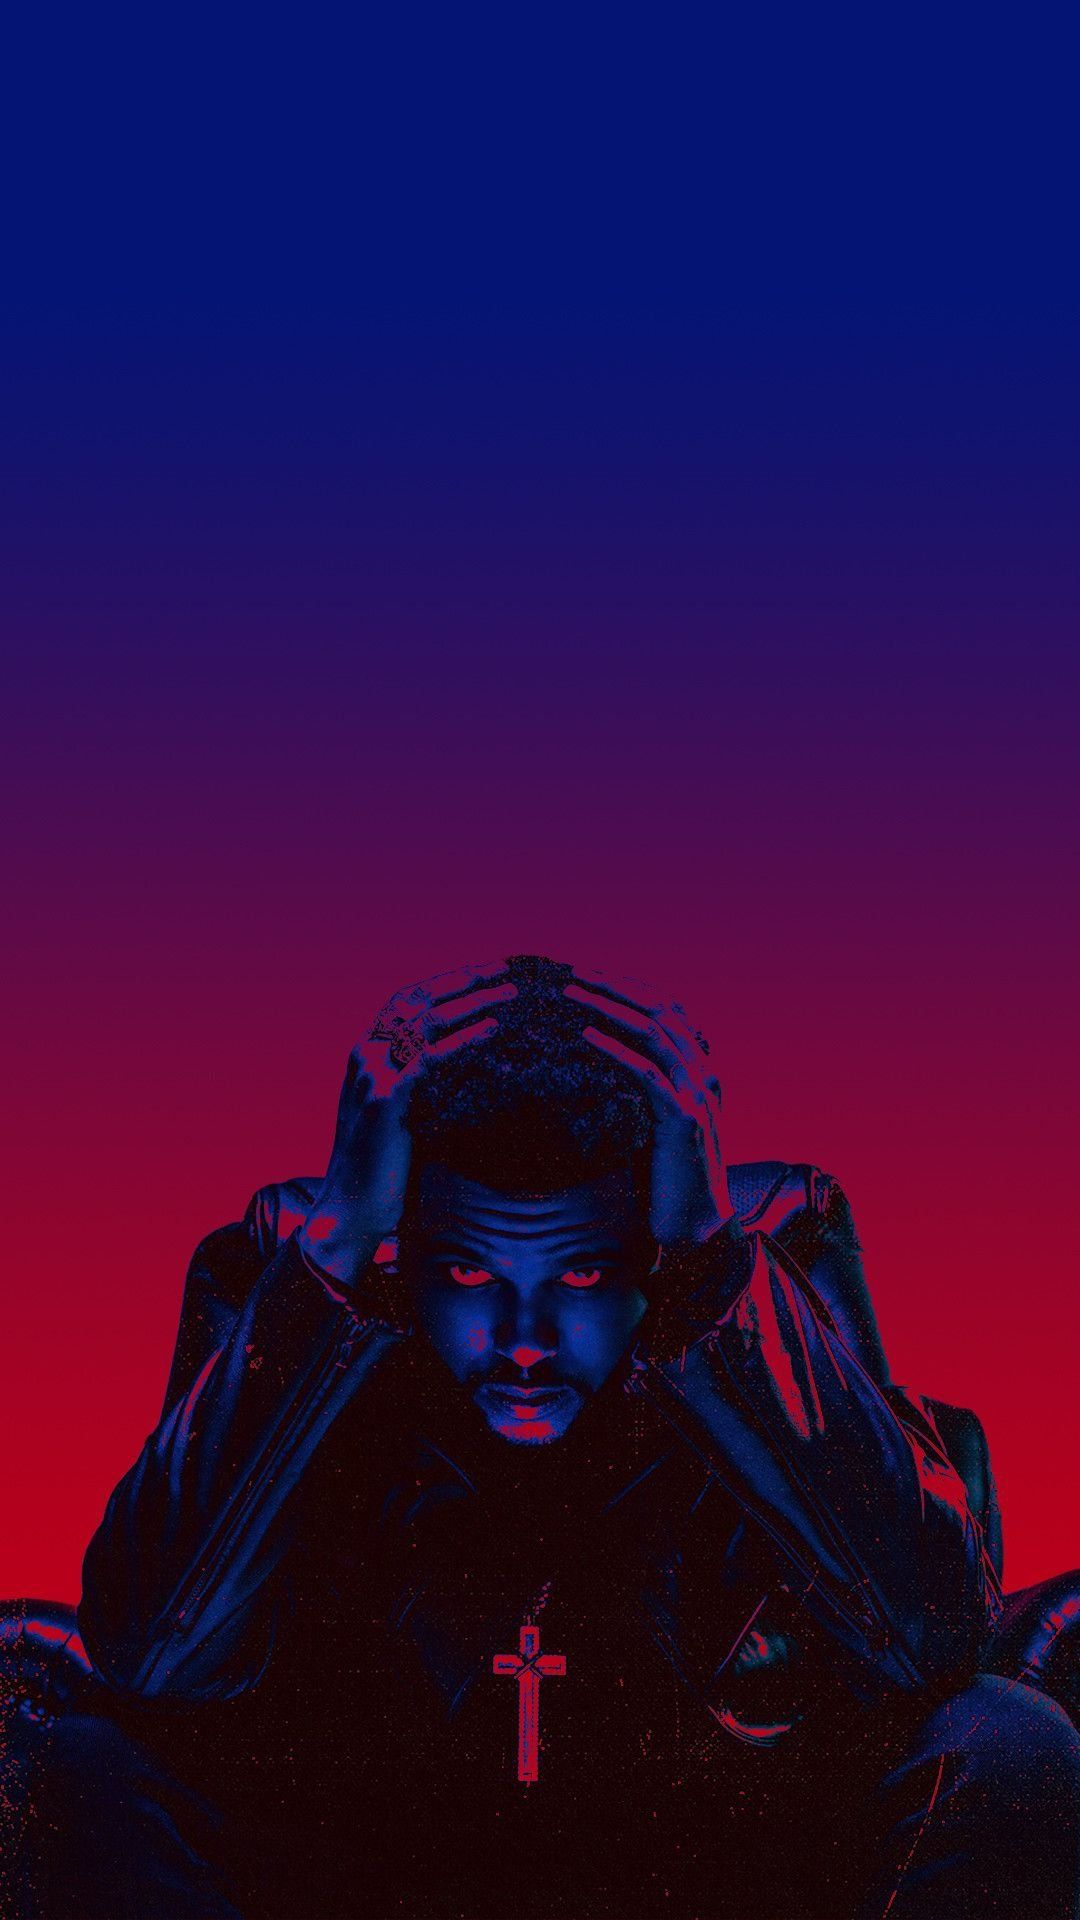 Chance 3 and acid rap iphone wallpaper that I worked on in anticipation for  chance 3 Im pretty new to this What do you guys think   rChanceTheRapper